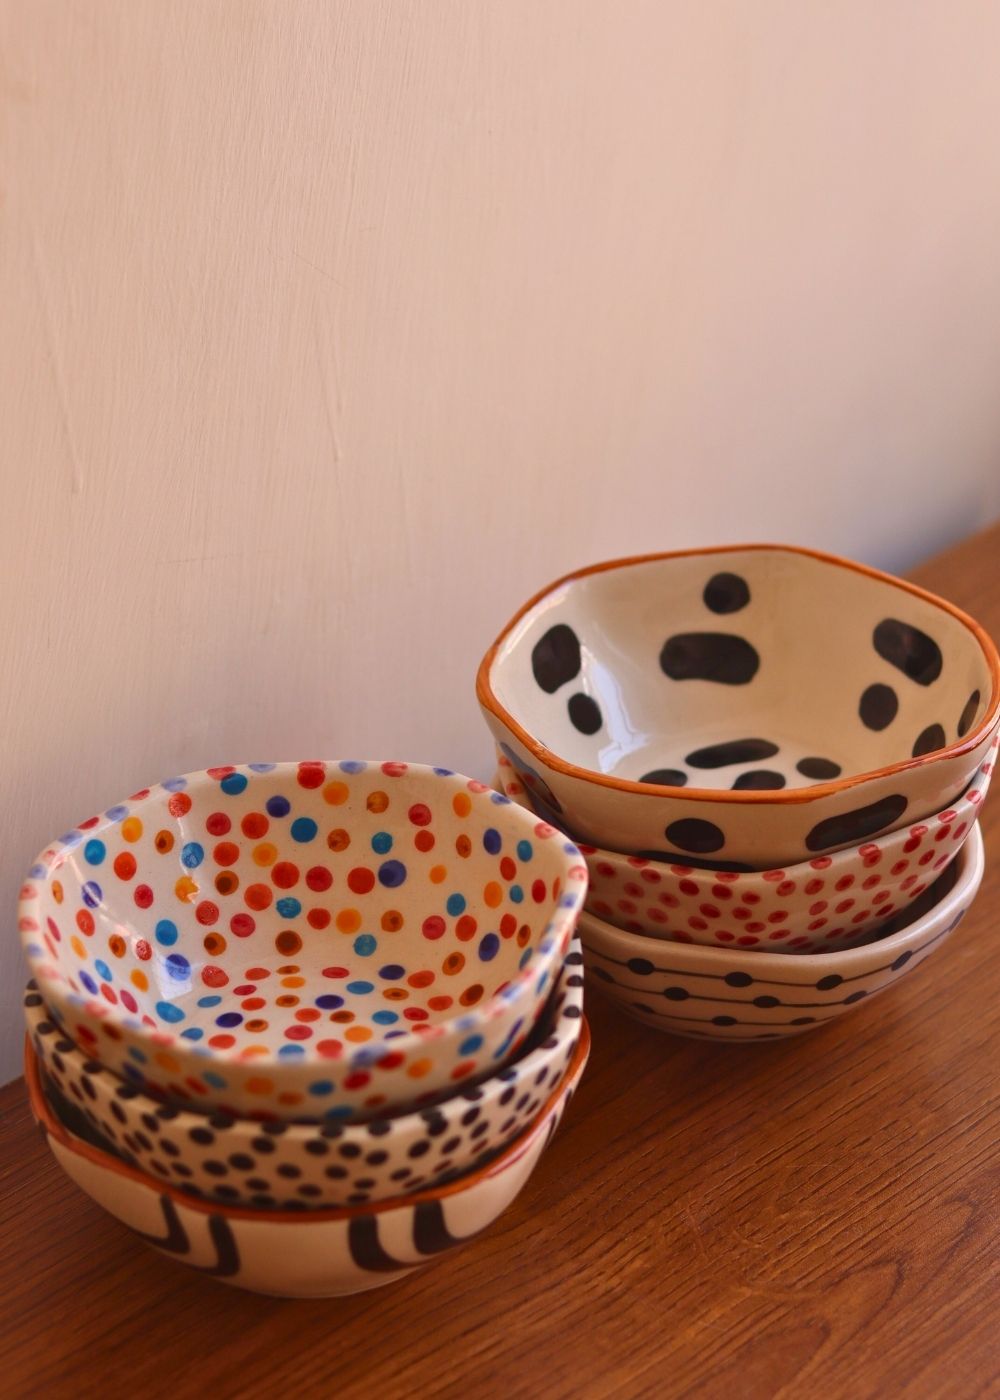 set of 6 mini bowl with different color & designs